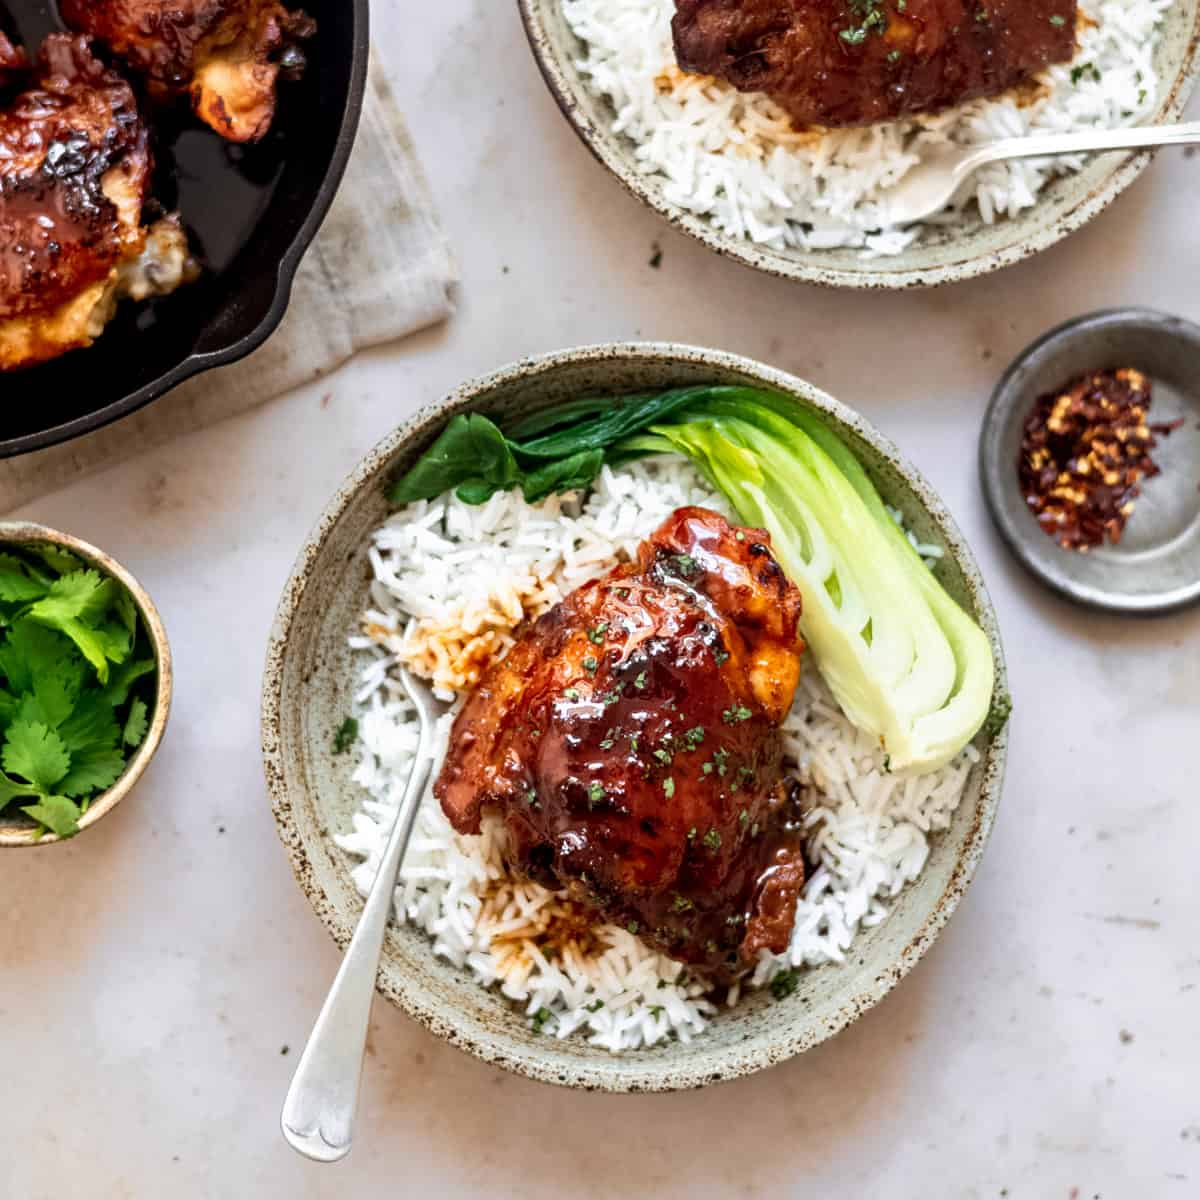 Honey garlic chicken thighs over rice with greens.